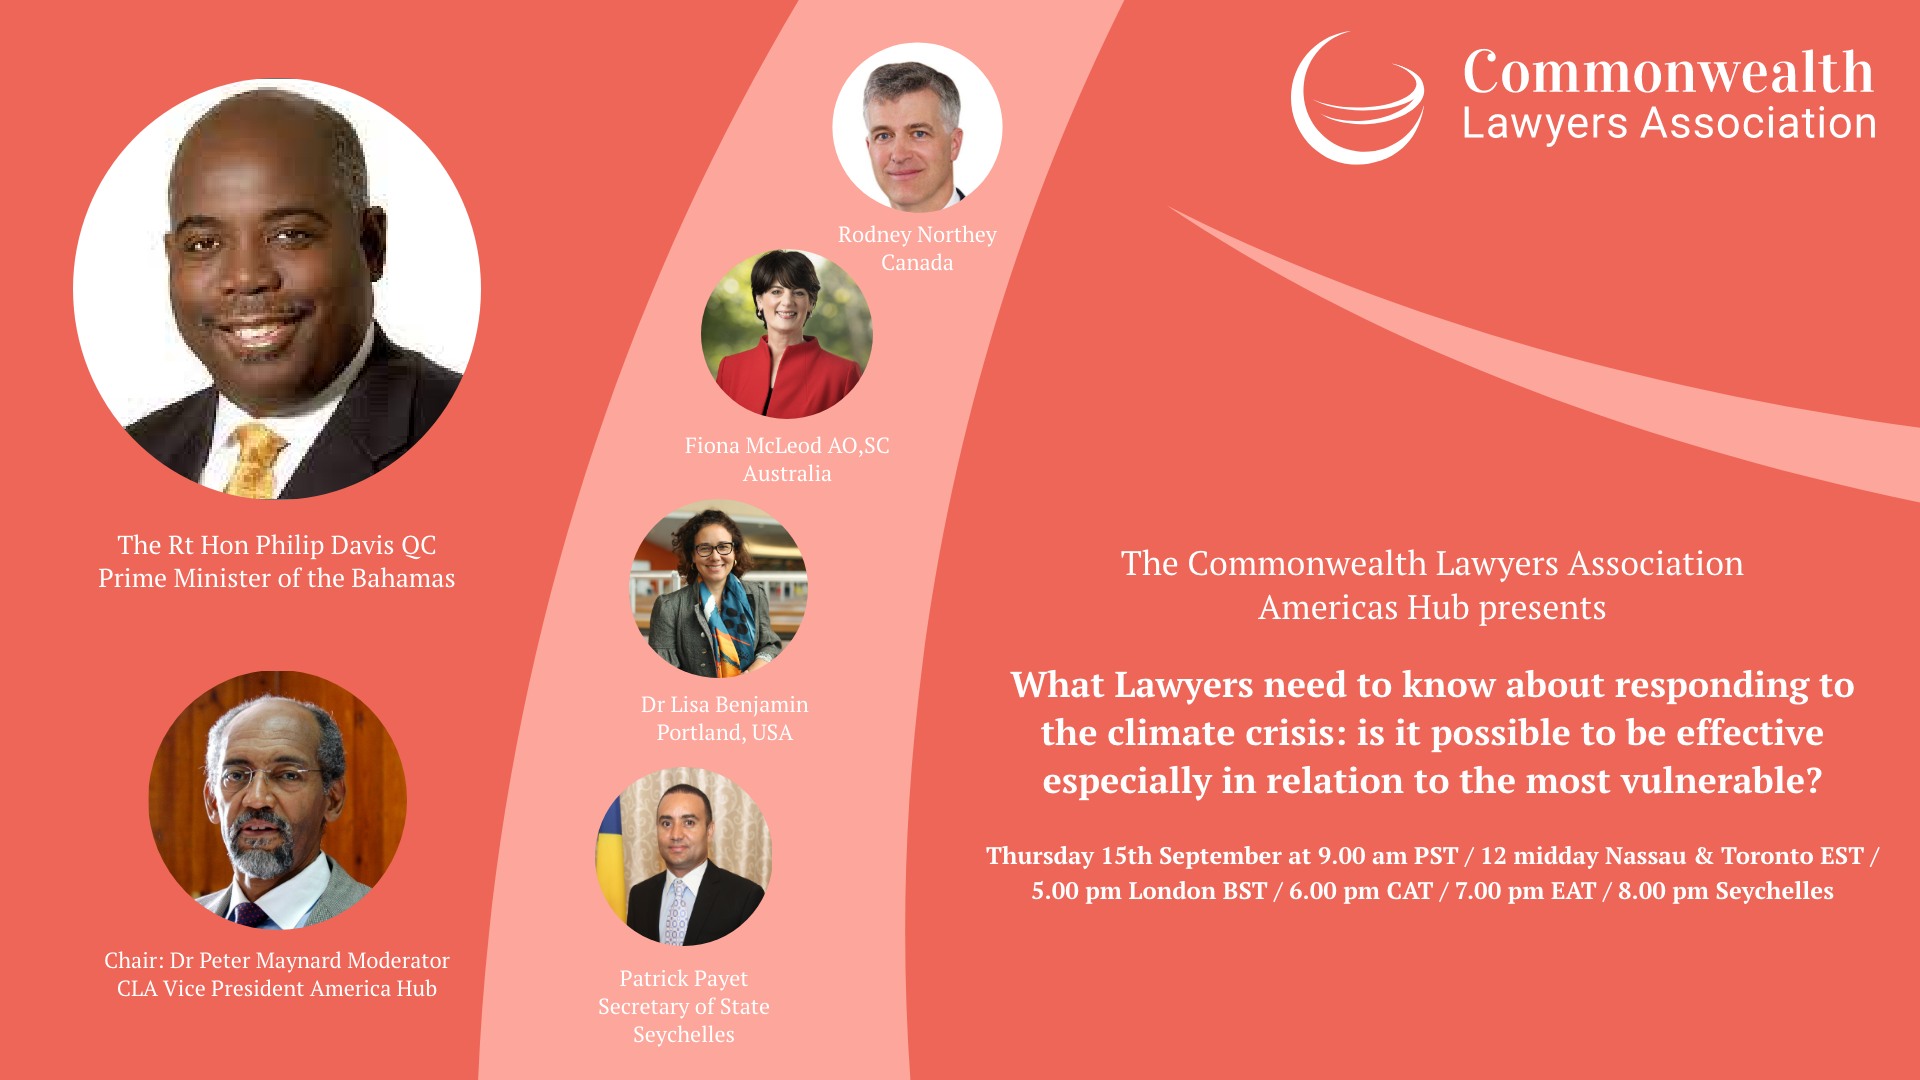 the-cla-americas-hub-presents-what-lawyers-need-to-know-about